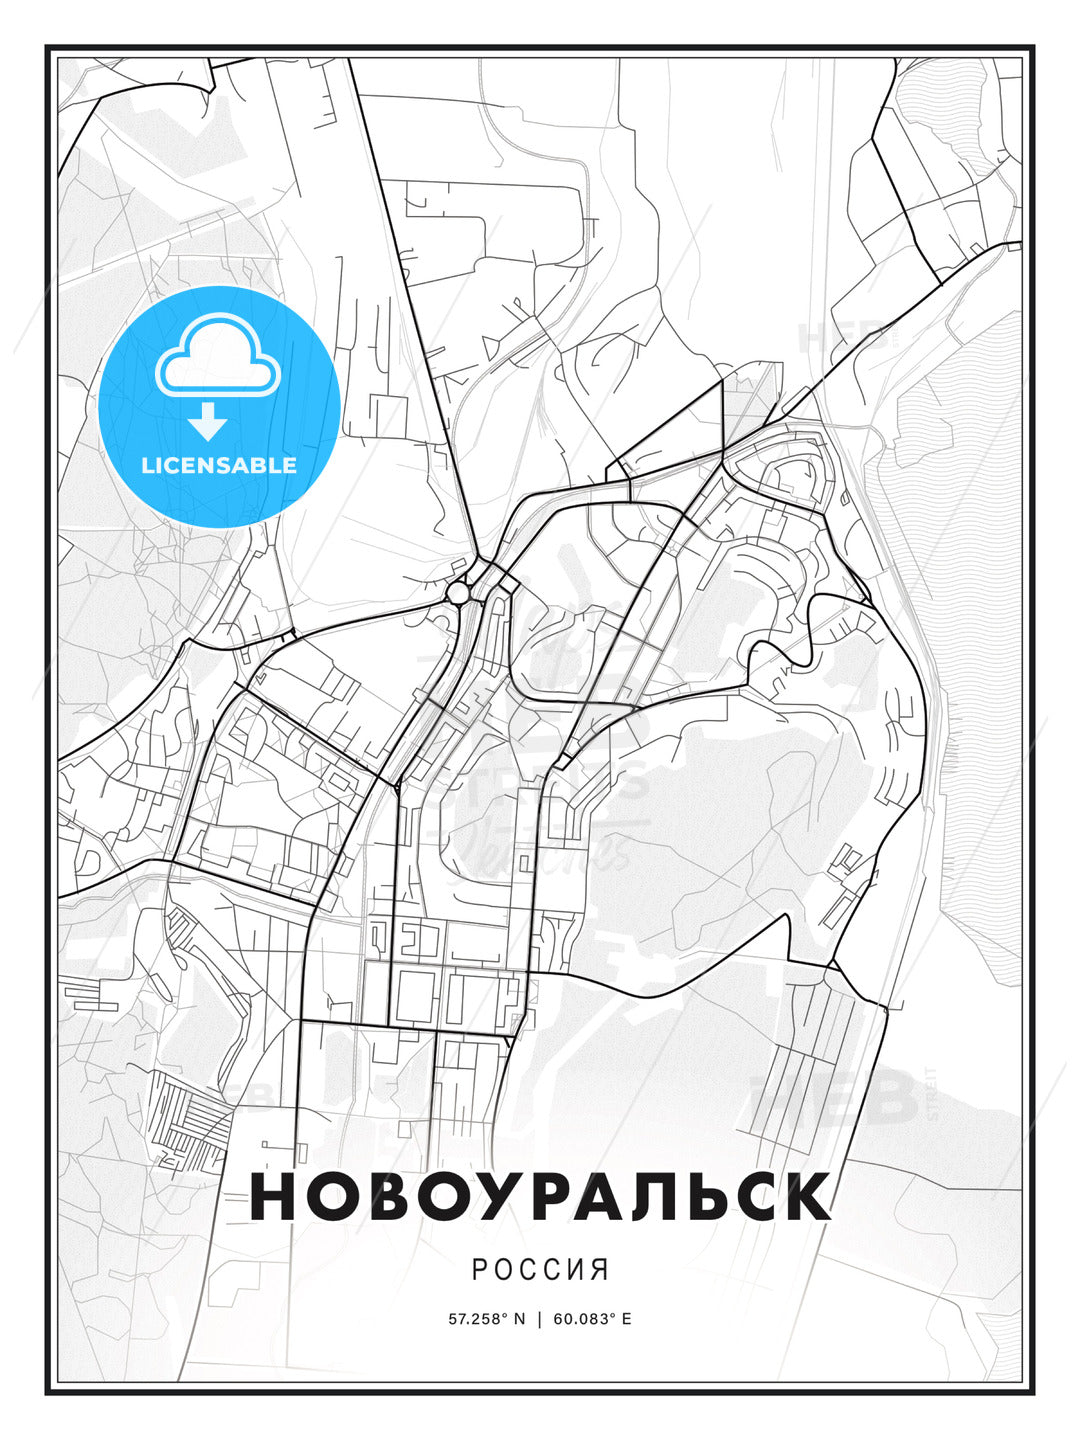 НОВОУРАЛЬСК / Novouralsk, Russia, Modern Print Template in Various Formats - HEBSTREITS Sketches